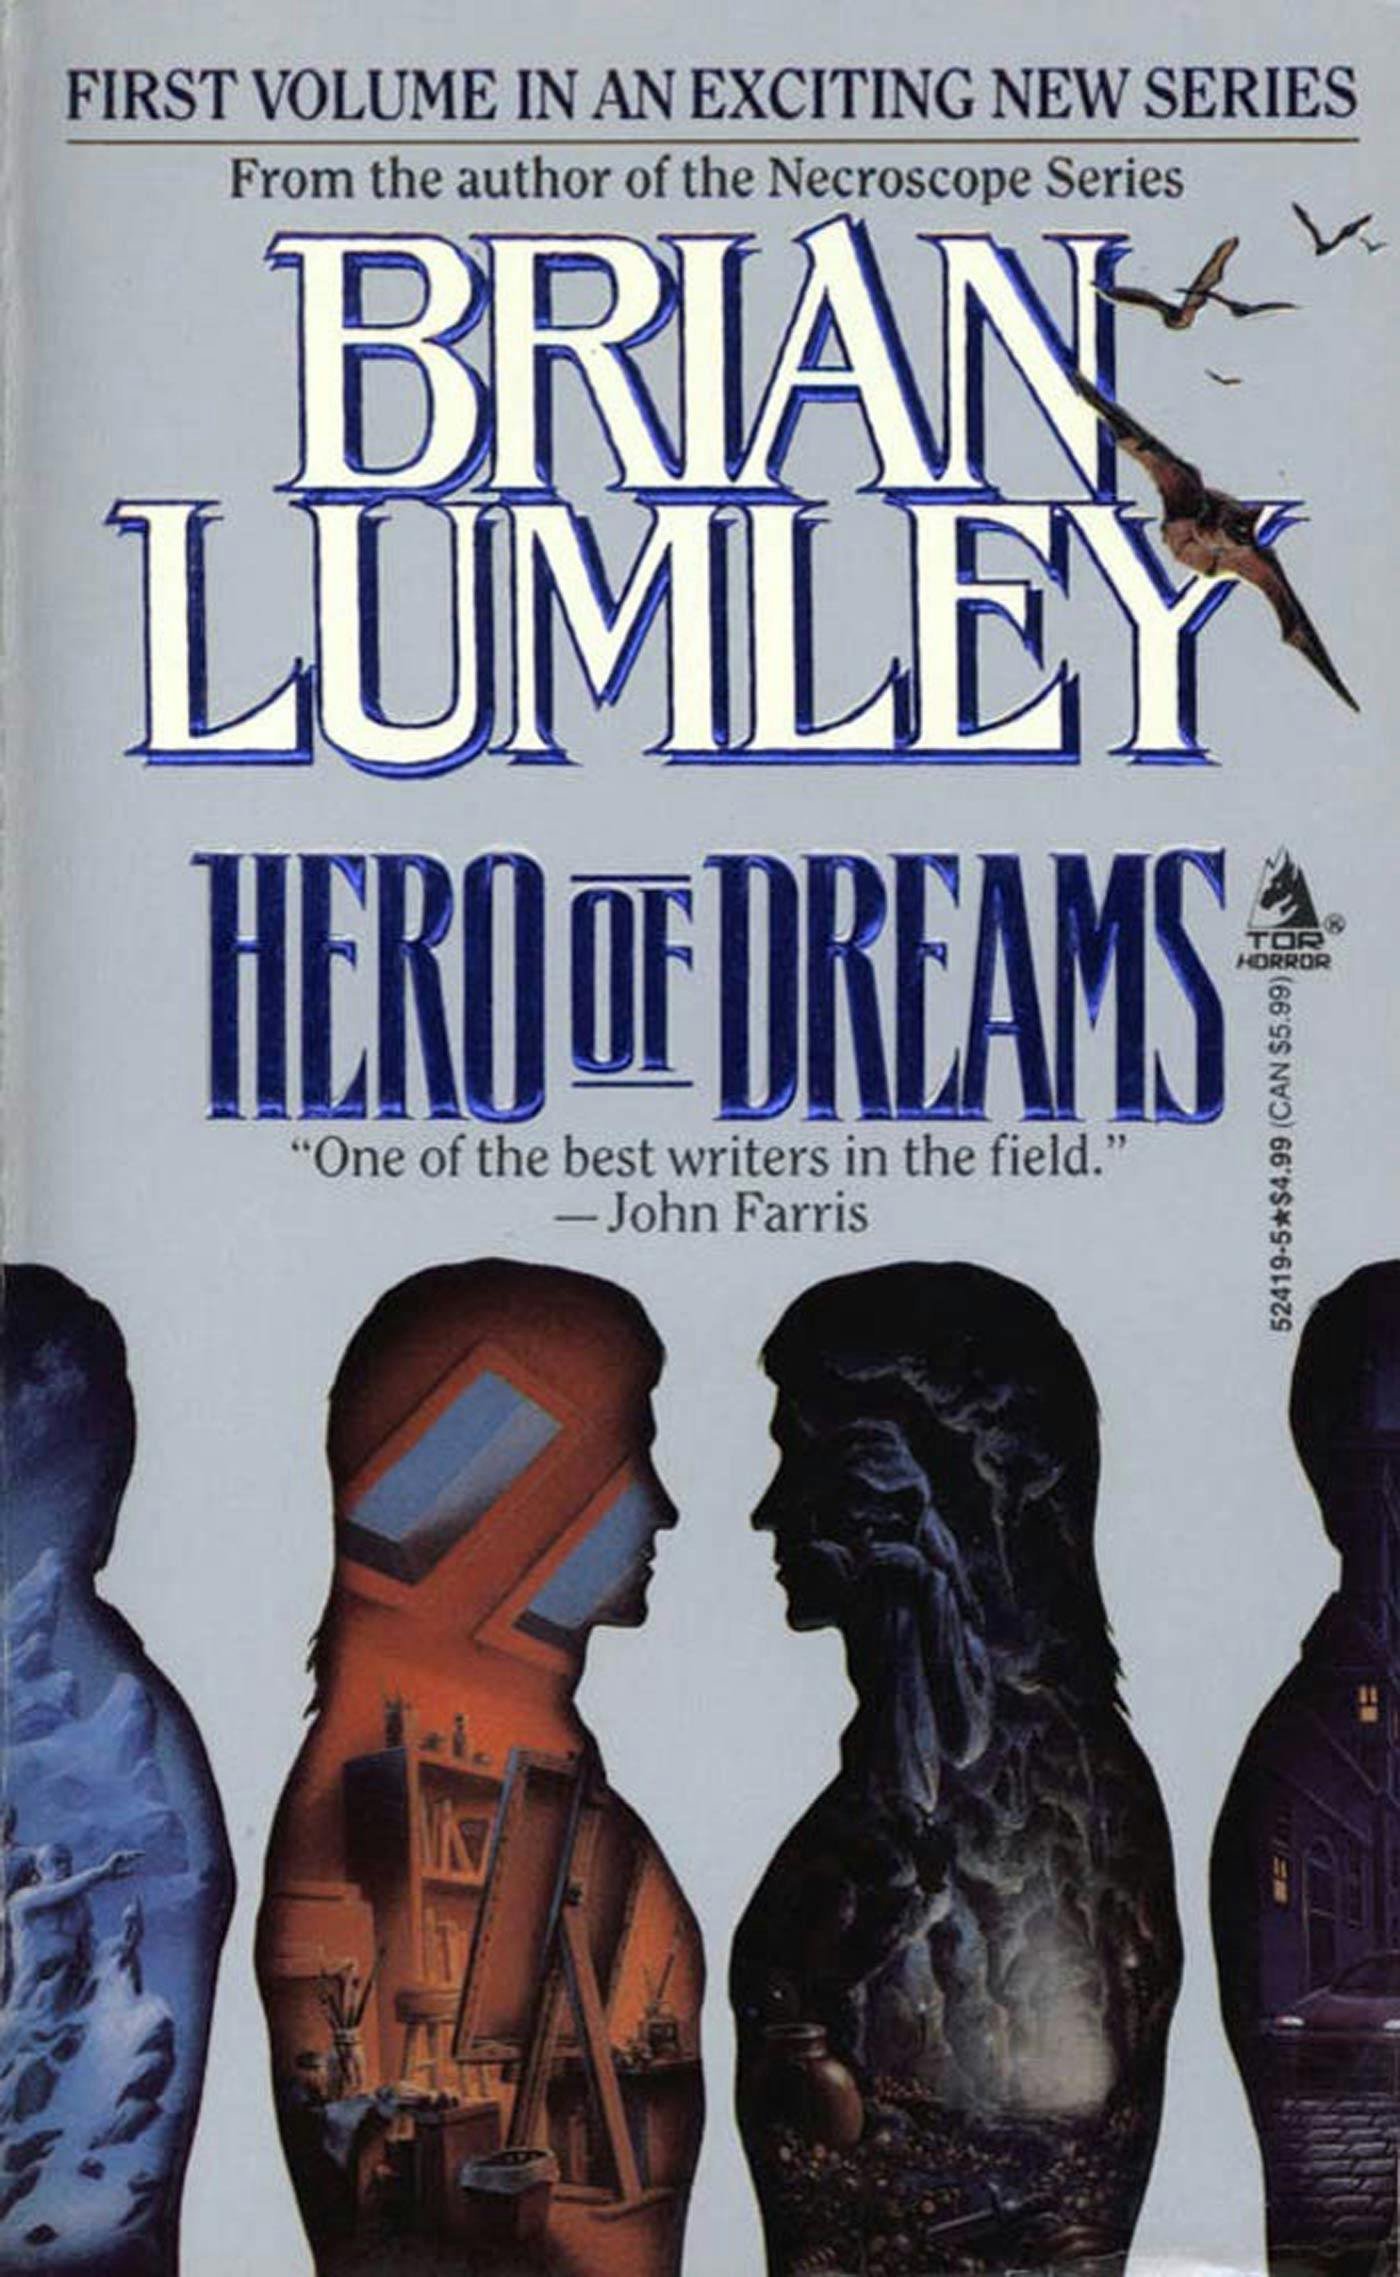 Cover for the book titled as: Hero of Dreams